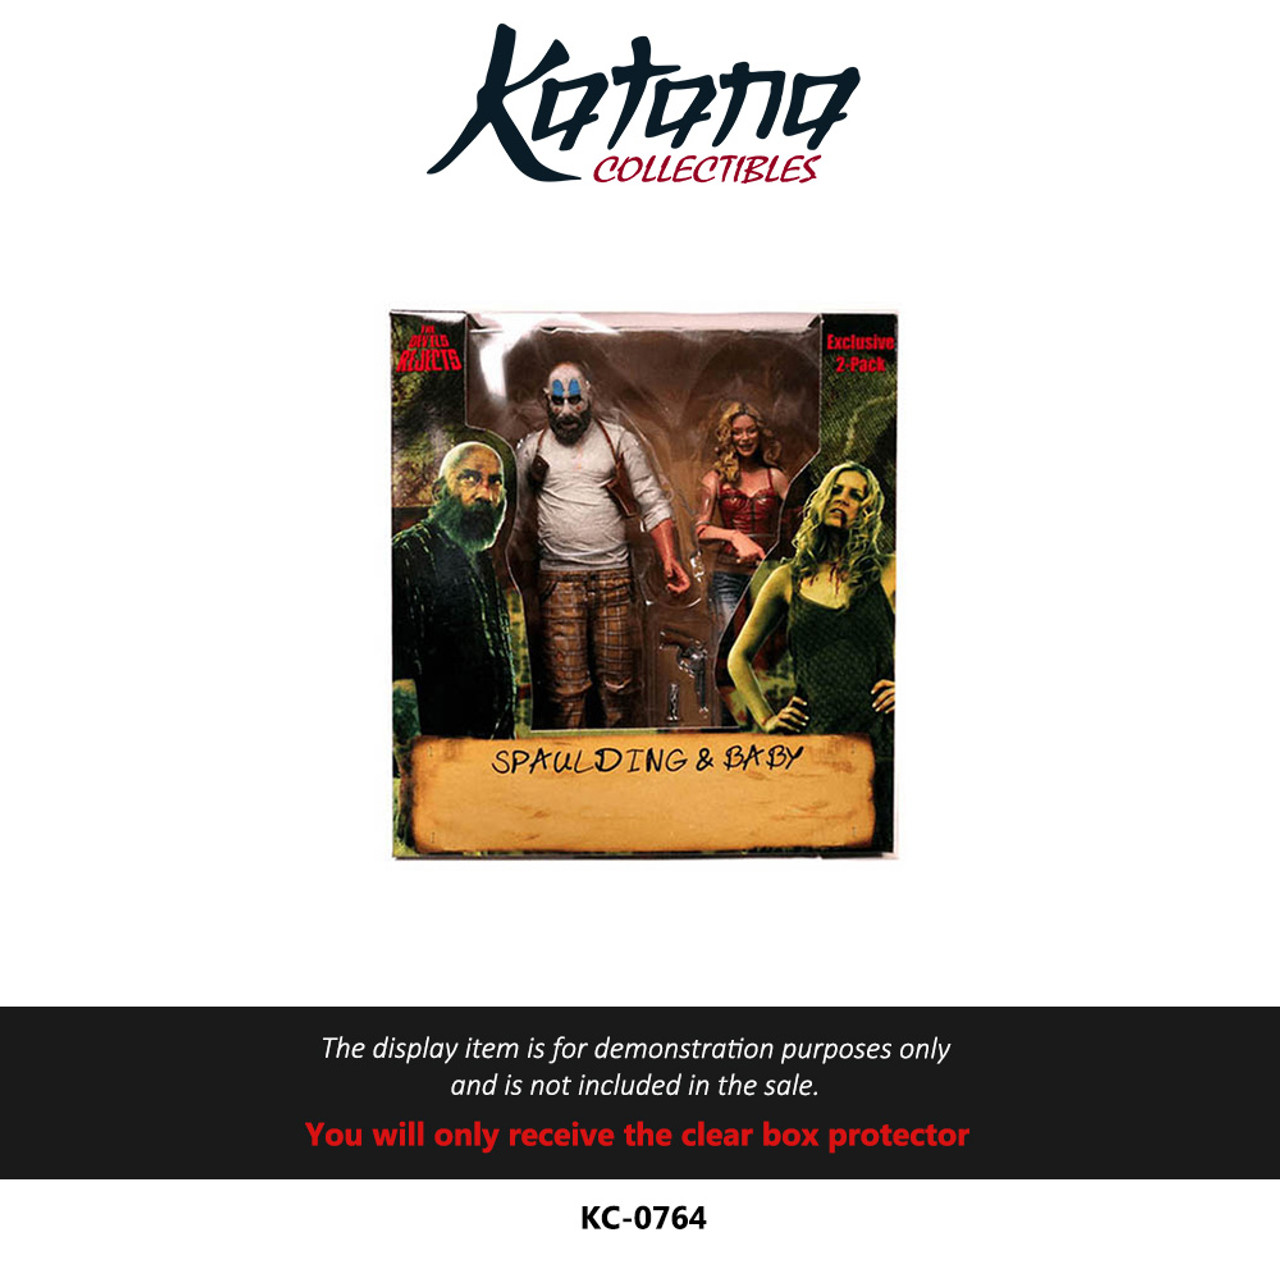 Katana Collectibles Protector For NECA The Devil's Rejects Spaulding & Baby Figure Set